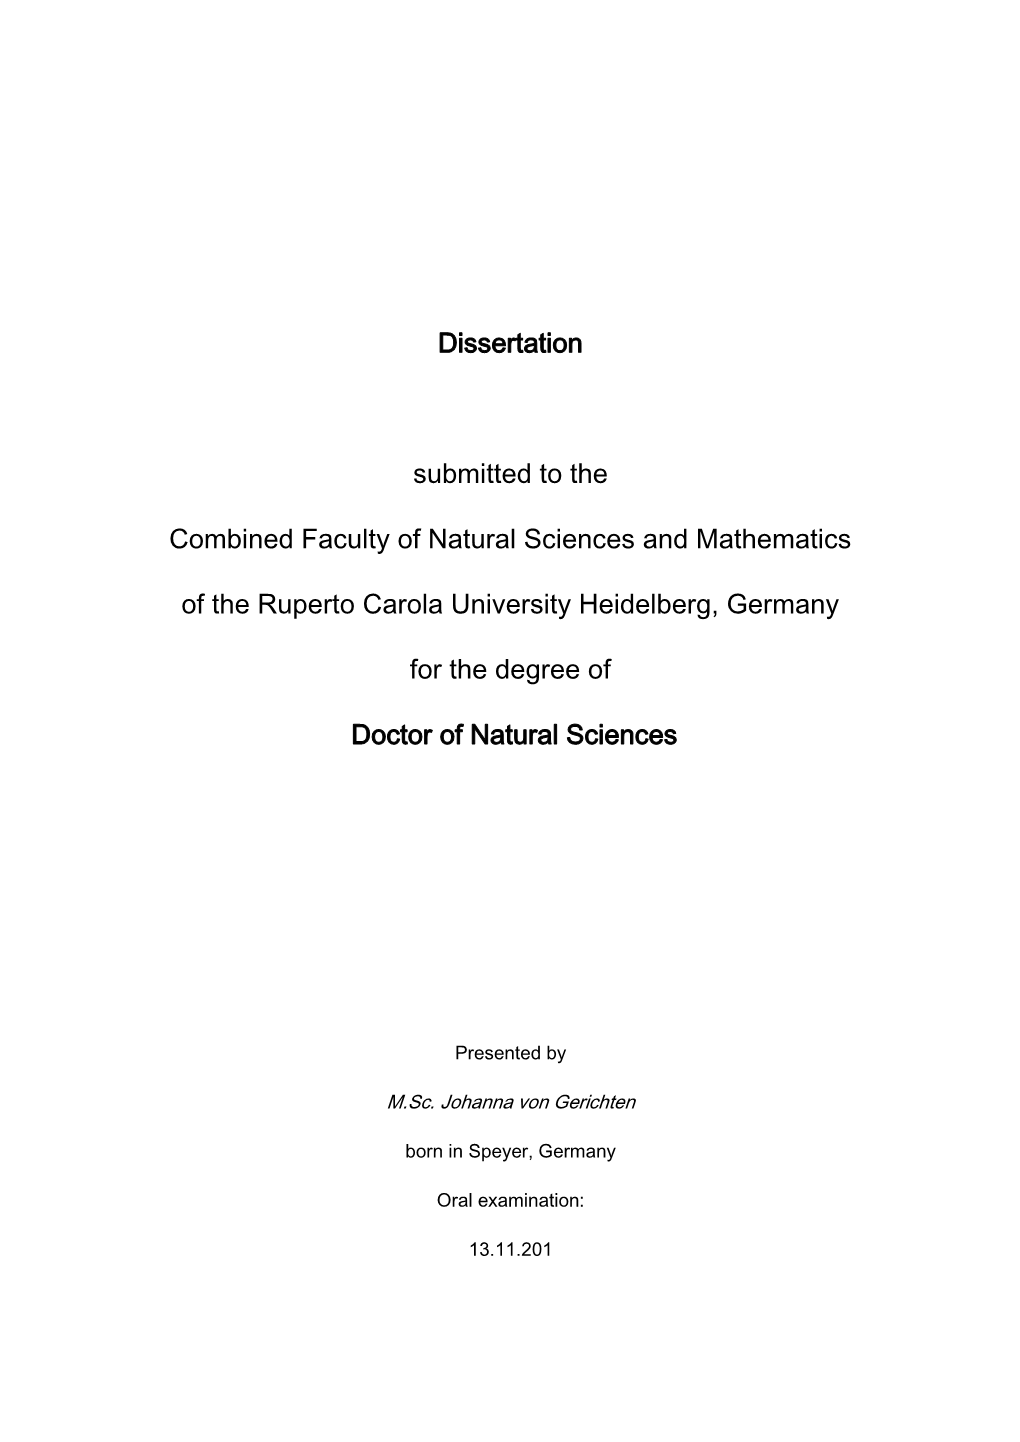 Dissertation Submitted to the Combined Faculty of Natural